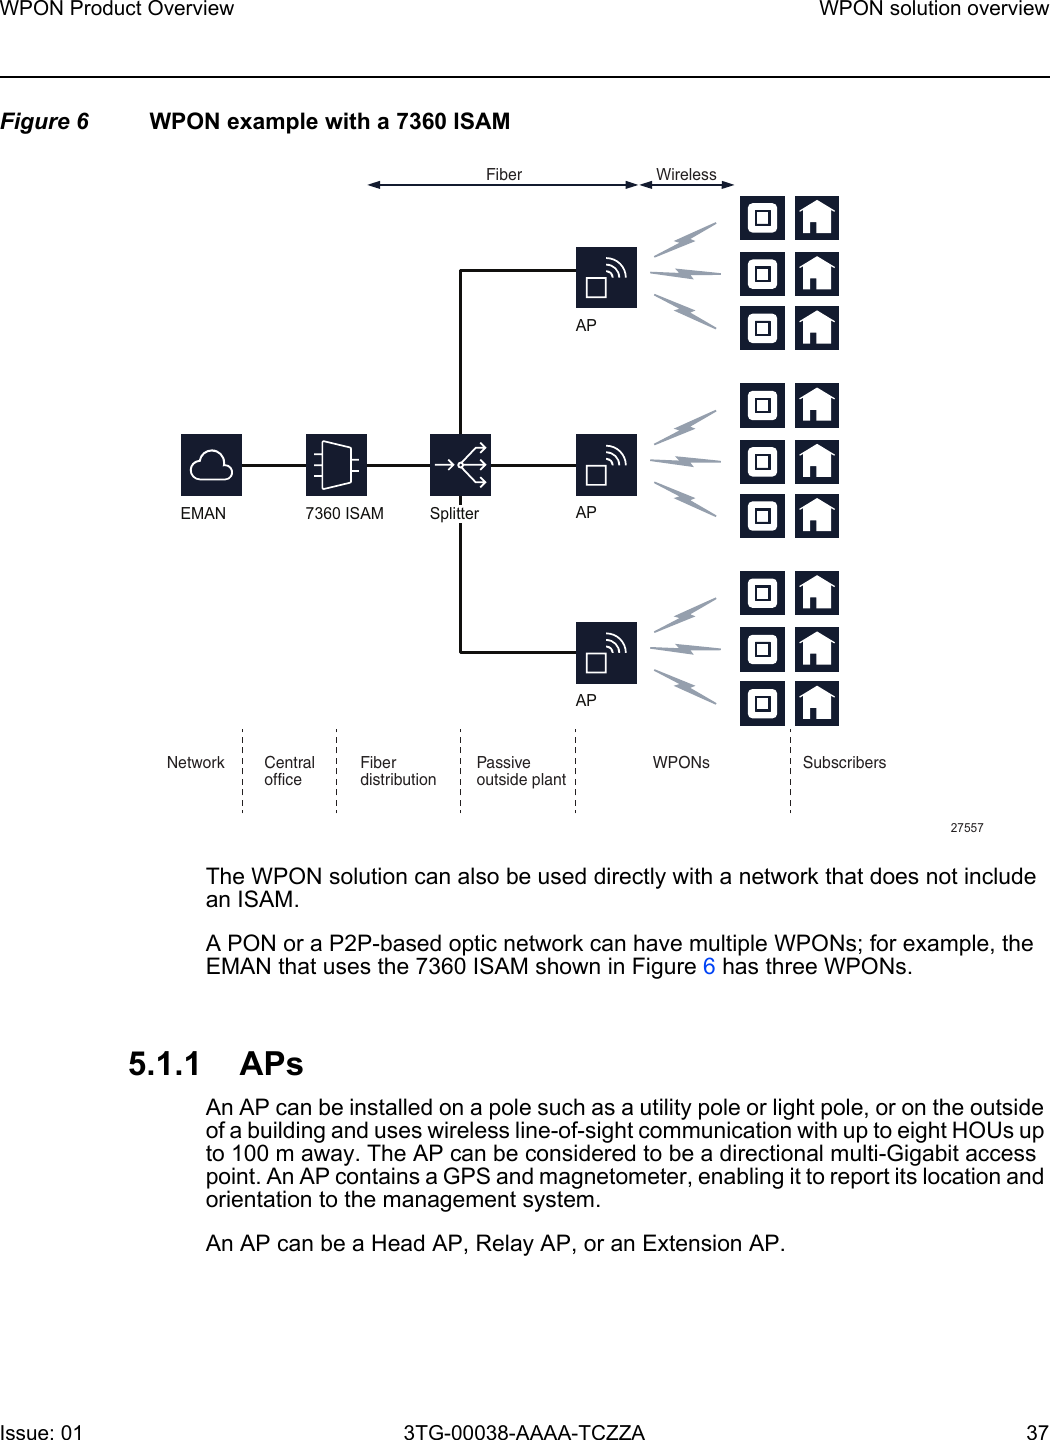 WPON Product Overview WPON solution overviewIssue: 01 3TG-00038-AAAA-TCZZA 37 Figure 6 WPON example with a 7360 ISAMThe WPON solution can also be used directly with a network that does not include an ISAM.A PON or a P2P-based optic network can have multiple WPONs; for example, the EMAN that uses the 7360 ISAM shown in Figure 6 has three WPONs. 5.1.1 APsAn AP can be installed on a pole such as a utility pole or light pole, or on the outside of a building and uses wireless line-of-sight communication with up to eight HOUs up to 100 m away. The AP can be considered to be a directional multi-Gigabit access point. An AP contains a GPS and magnetometer, enabling it to report its location and orientation to the management system. An AP can be a Head AP, Relay AP, or an Extension AP.APEMANWirelessFiberSubscribersWPONsPassiveoutside plantFiberdistributionCentralofficeNetwork275577360 ISAMAPAPSplitter